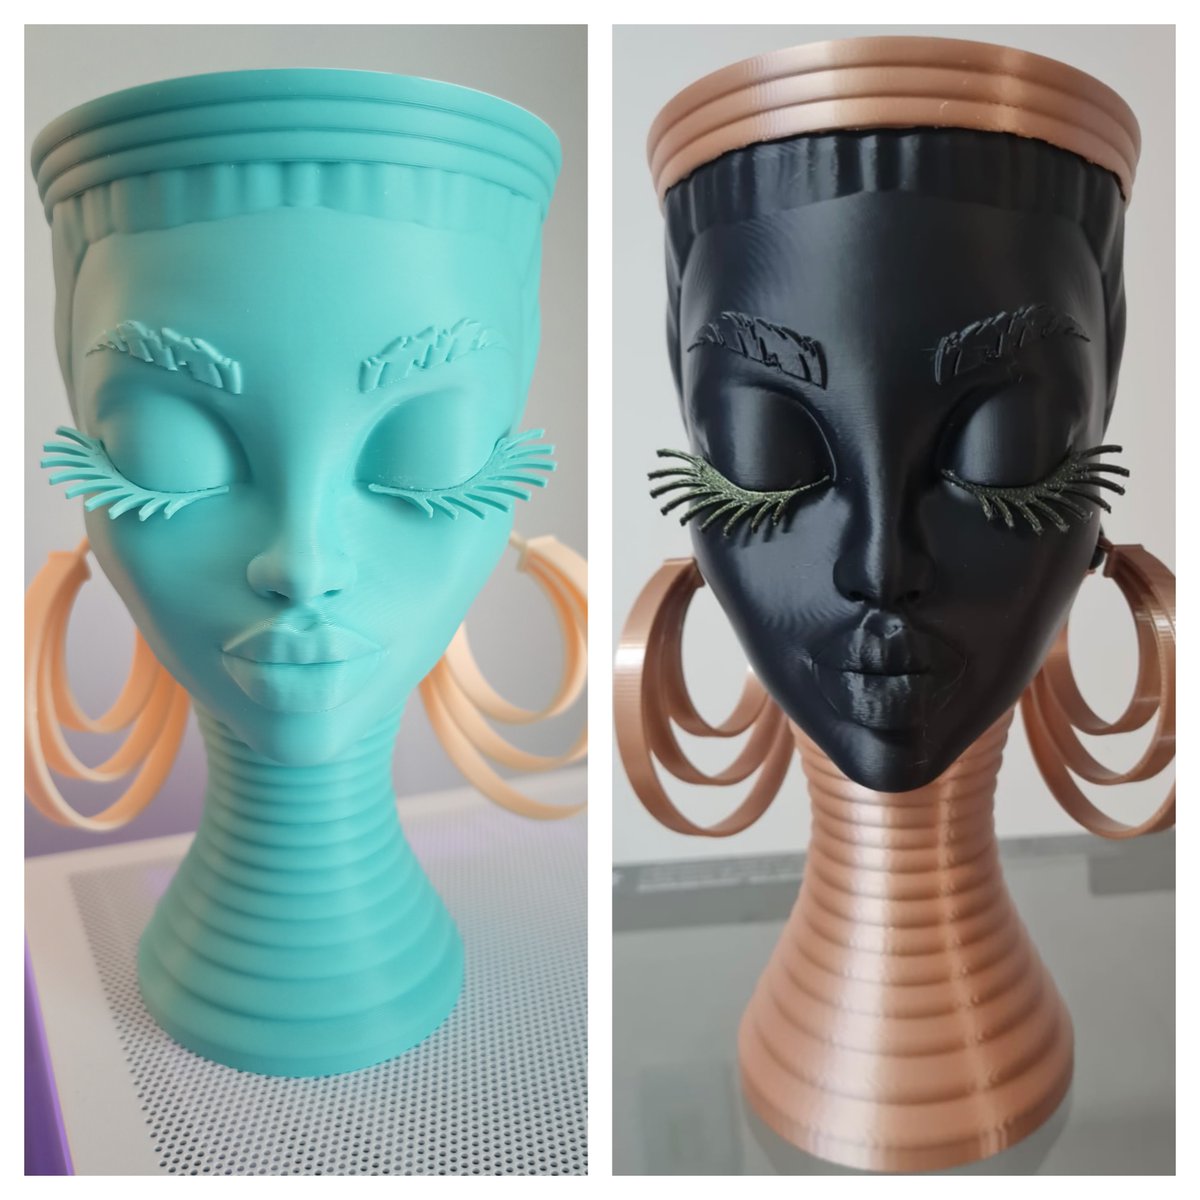 👉NEW ZIP FILE ADDED WITH THE PIECES DIVIDED!! YOU CAN PRINT THE FACE ,THE NECK AND THE CROWN IN DIFFERENT COLOURS 🏜️ DESERT QUEEN PLANTER ➡️ 3D model: cults3d.com/:1772515 💡 Designed by @oasis3dlab @cults3d #3dPrinting